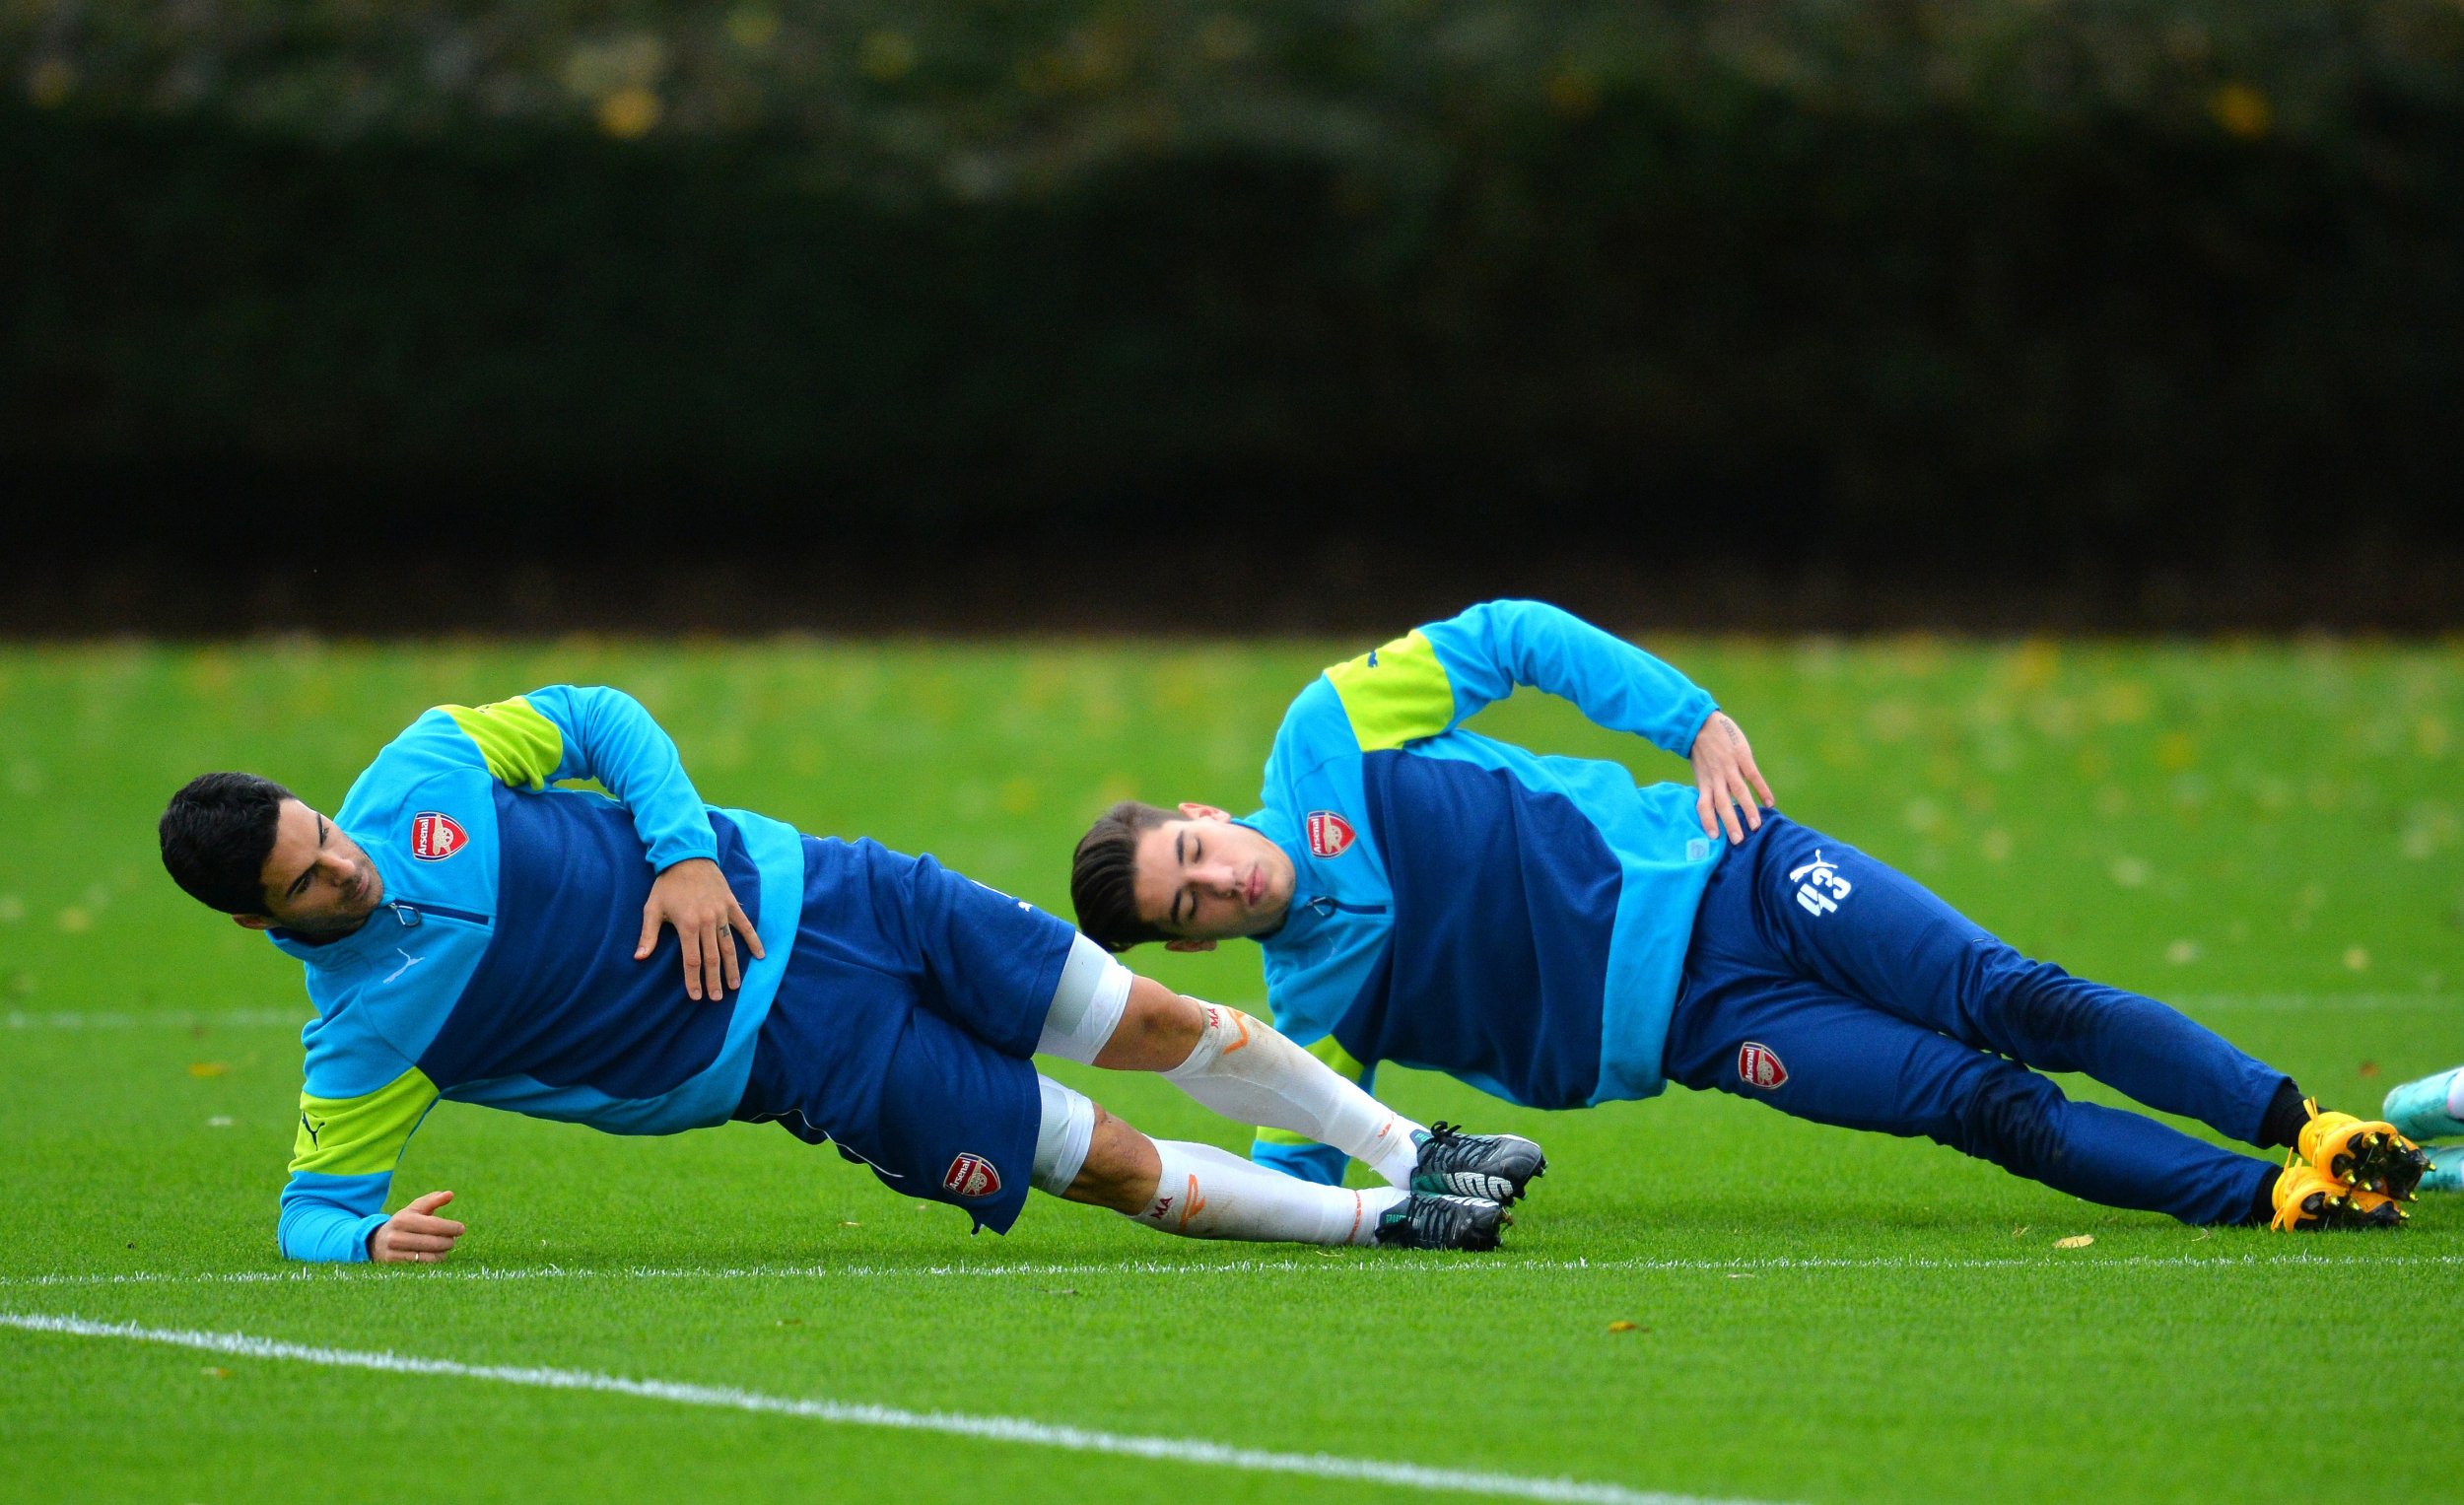 Mikel Arteta and Hector Bellerin compete in a game of head-tennis.